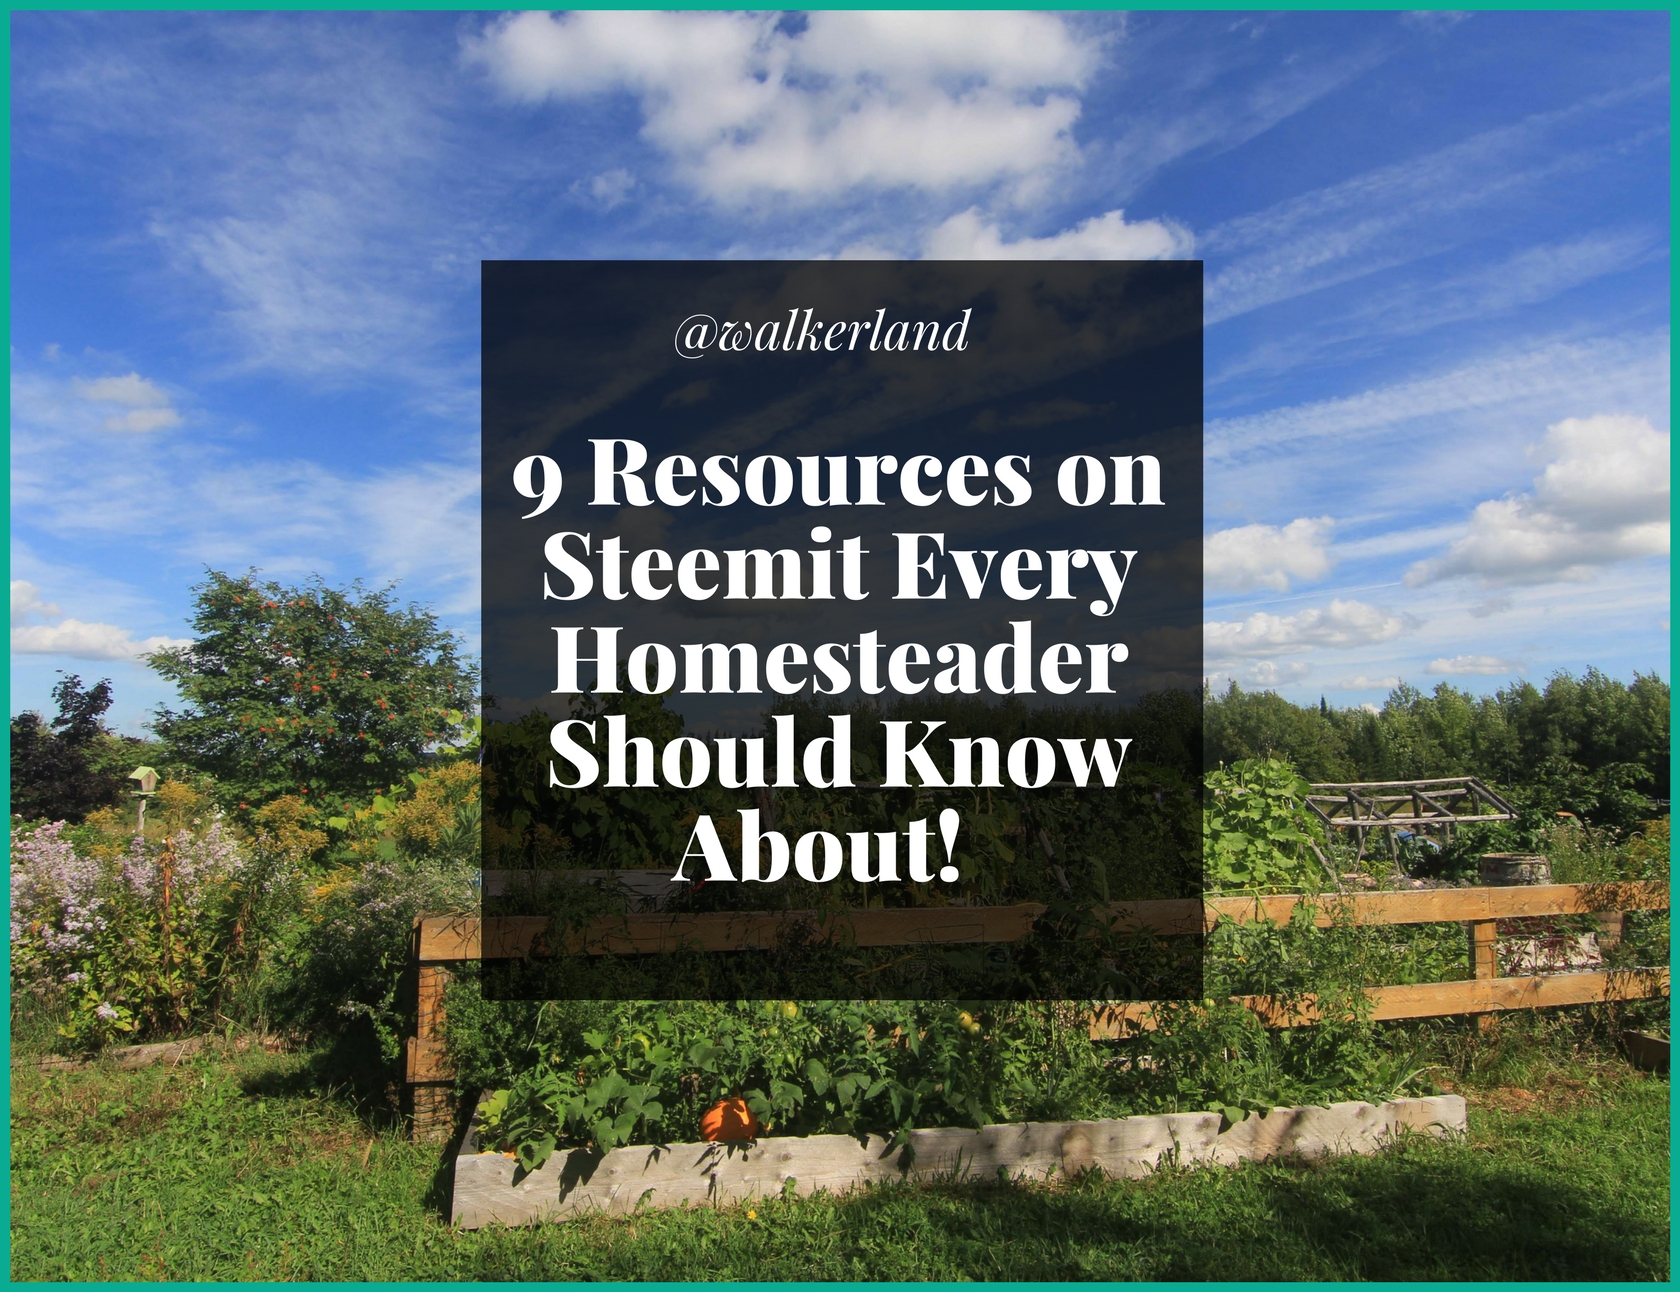 nine_resources_on_steemit_every_homesteader_should_know_about.jpg